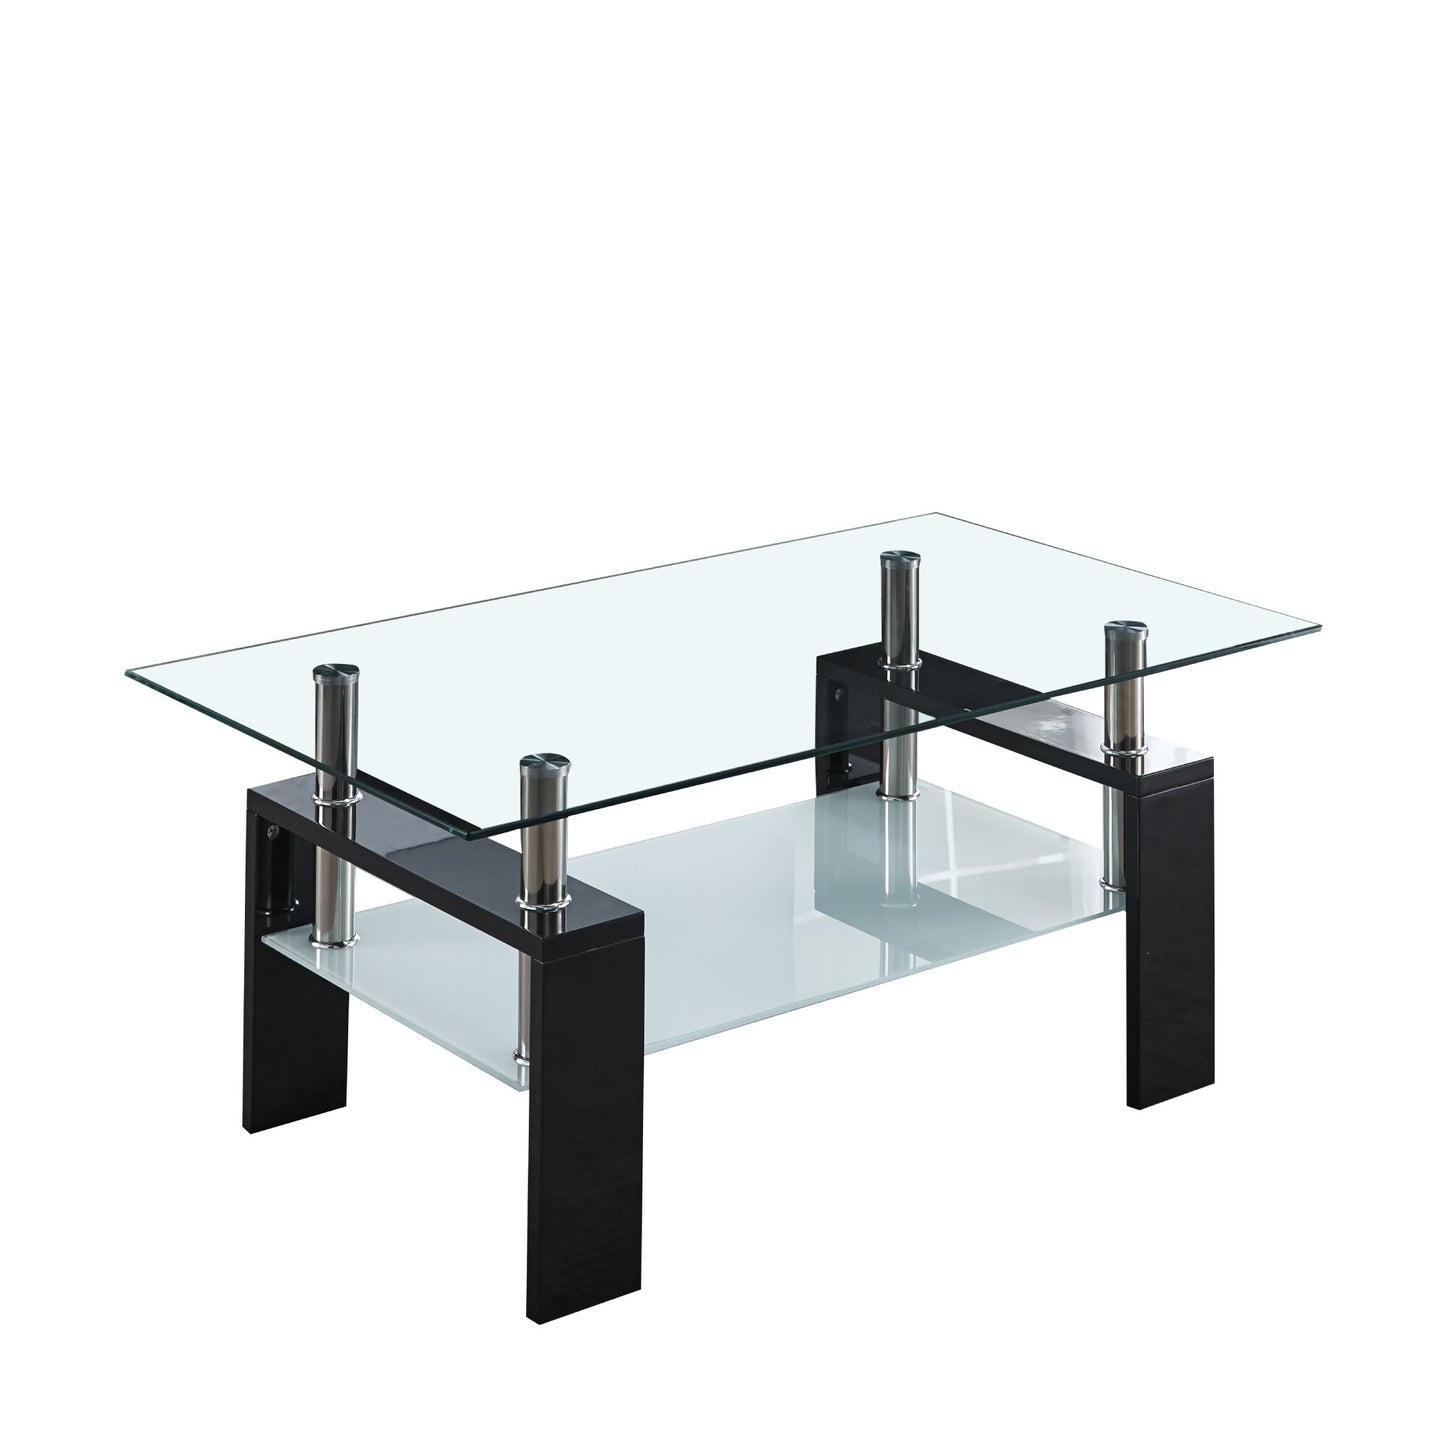 Artisan Center Coffee Table 2-Layer Tempered Glass Top Stainless Steel Legs for Living Room 37"Lx22"Dx16"H Black/White[US-W]